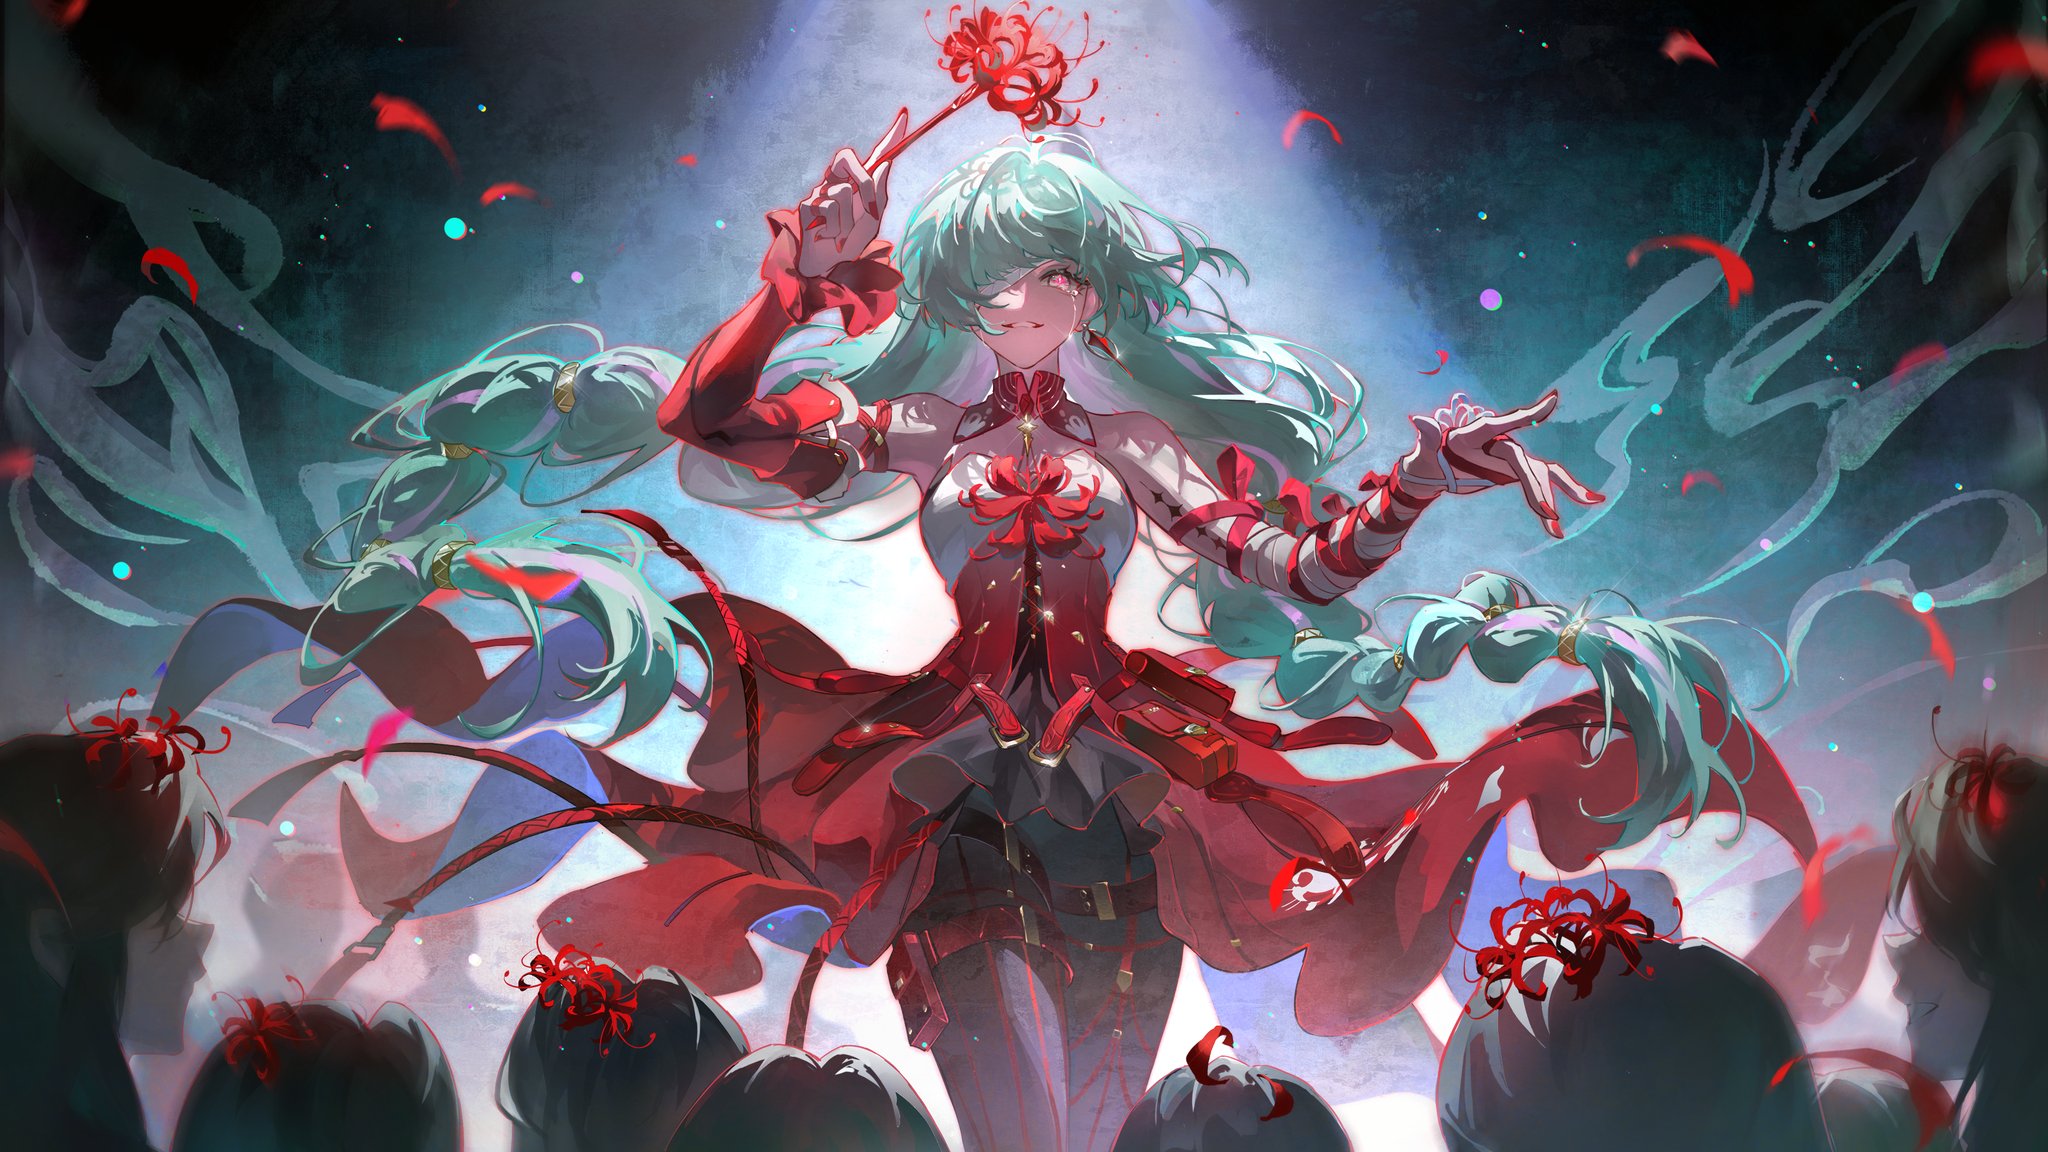 Wuthering Waves Blue Hair Video Game Art Anime Girls Anime Games Spider Lily Spider Lilies 2048x1152